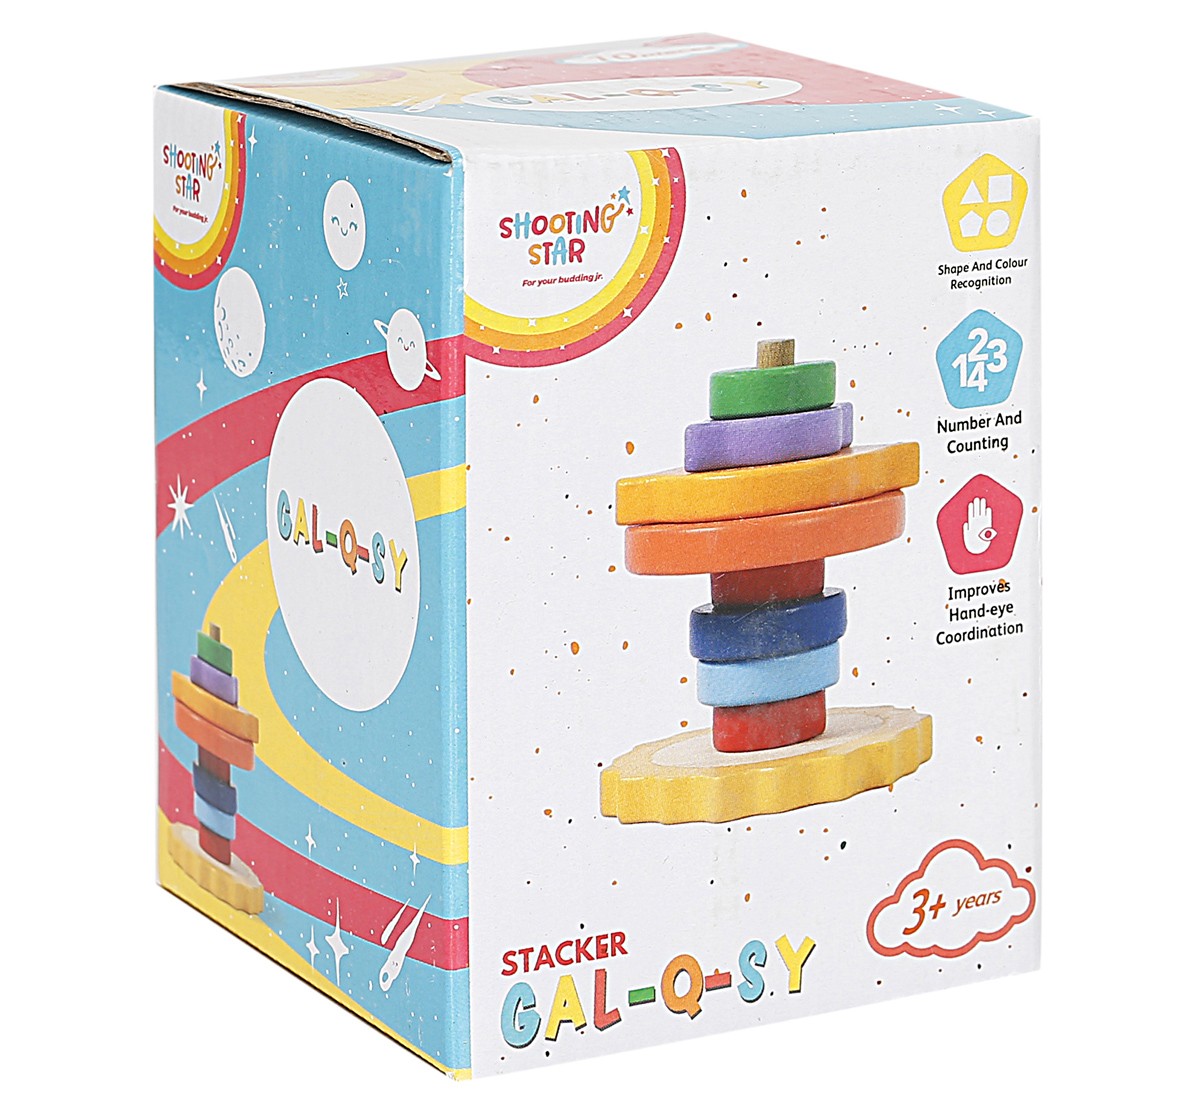 Shooting Star Planet Stacker for kids 3Y+, Multicolour